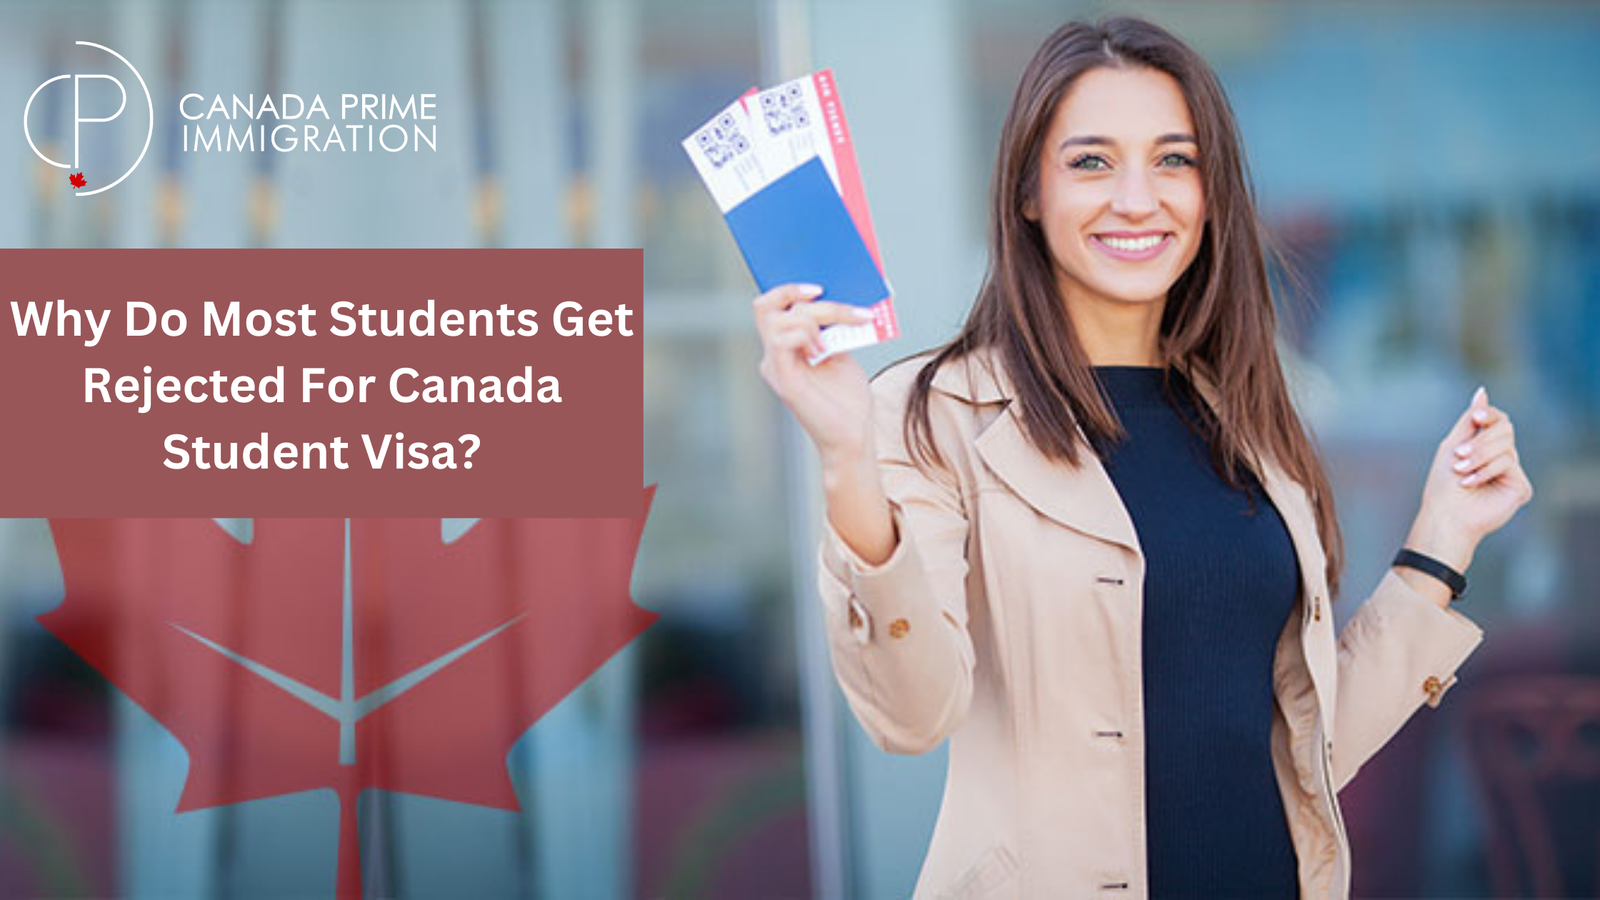 Why Do Most Students Get Rejected For Canada Student Visa?